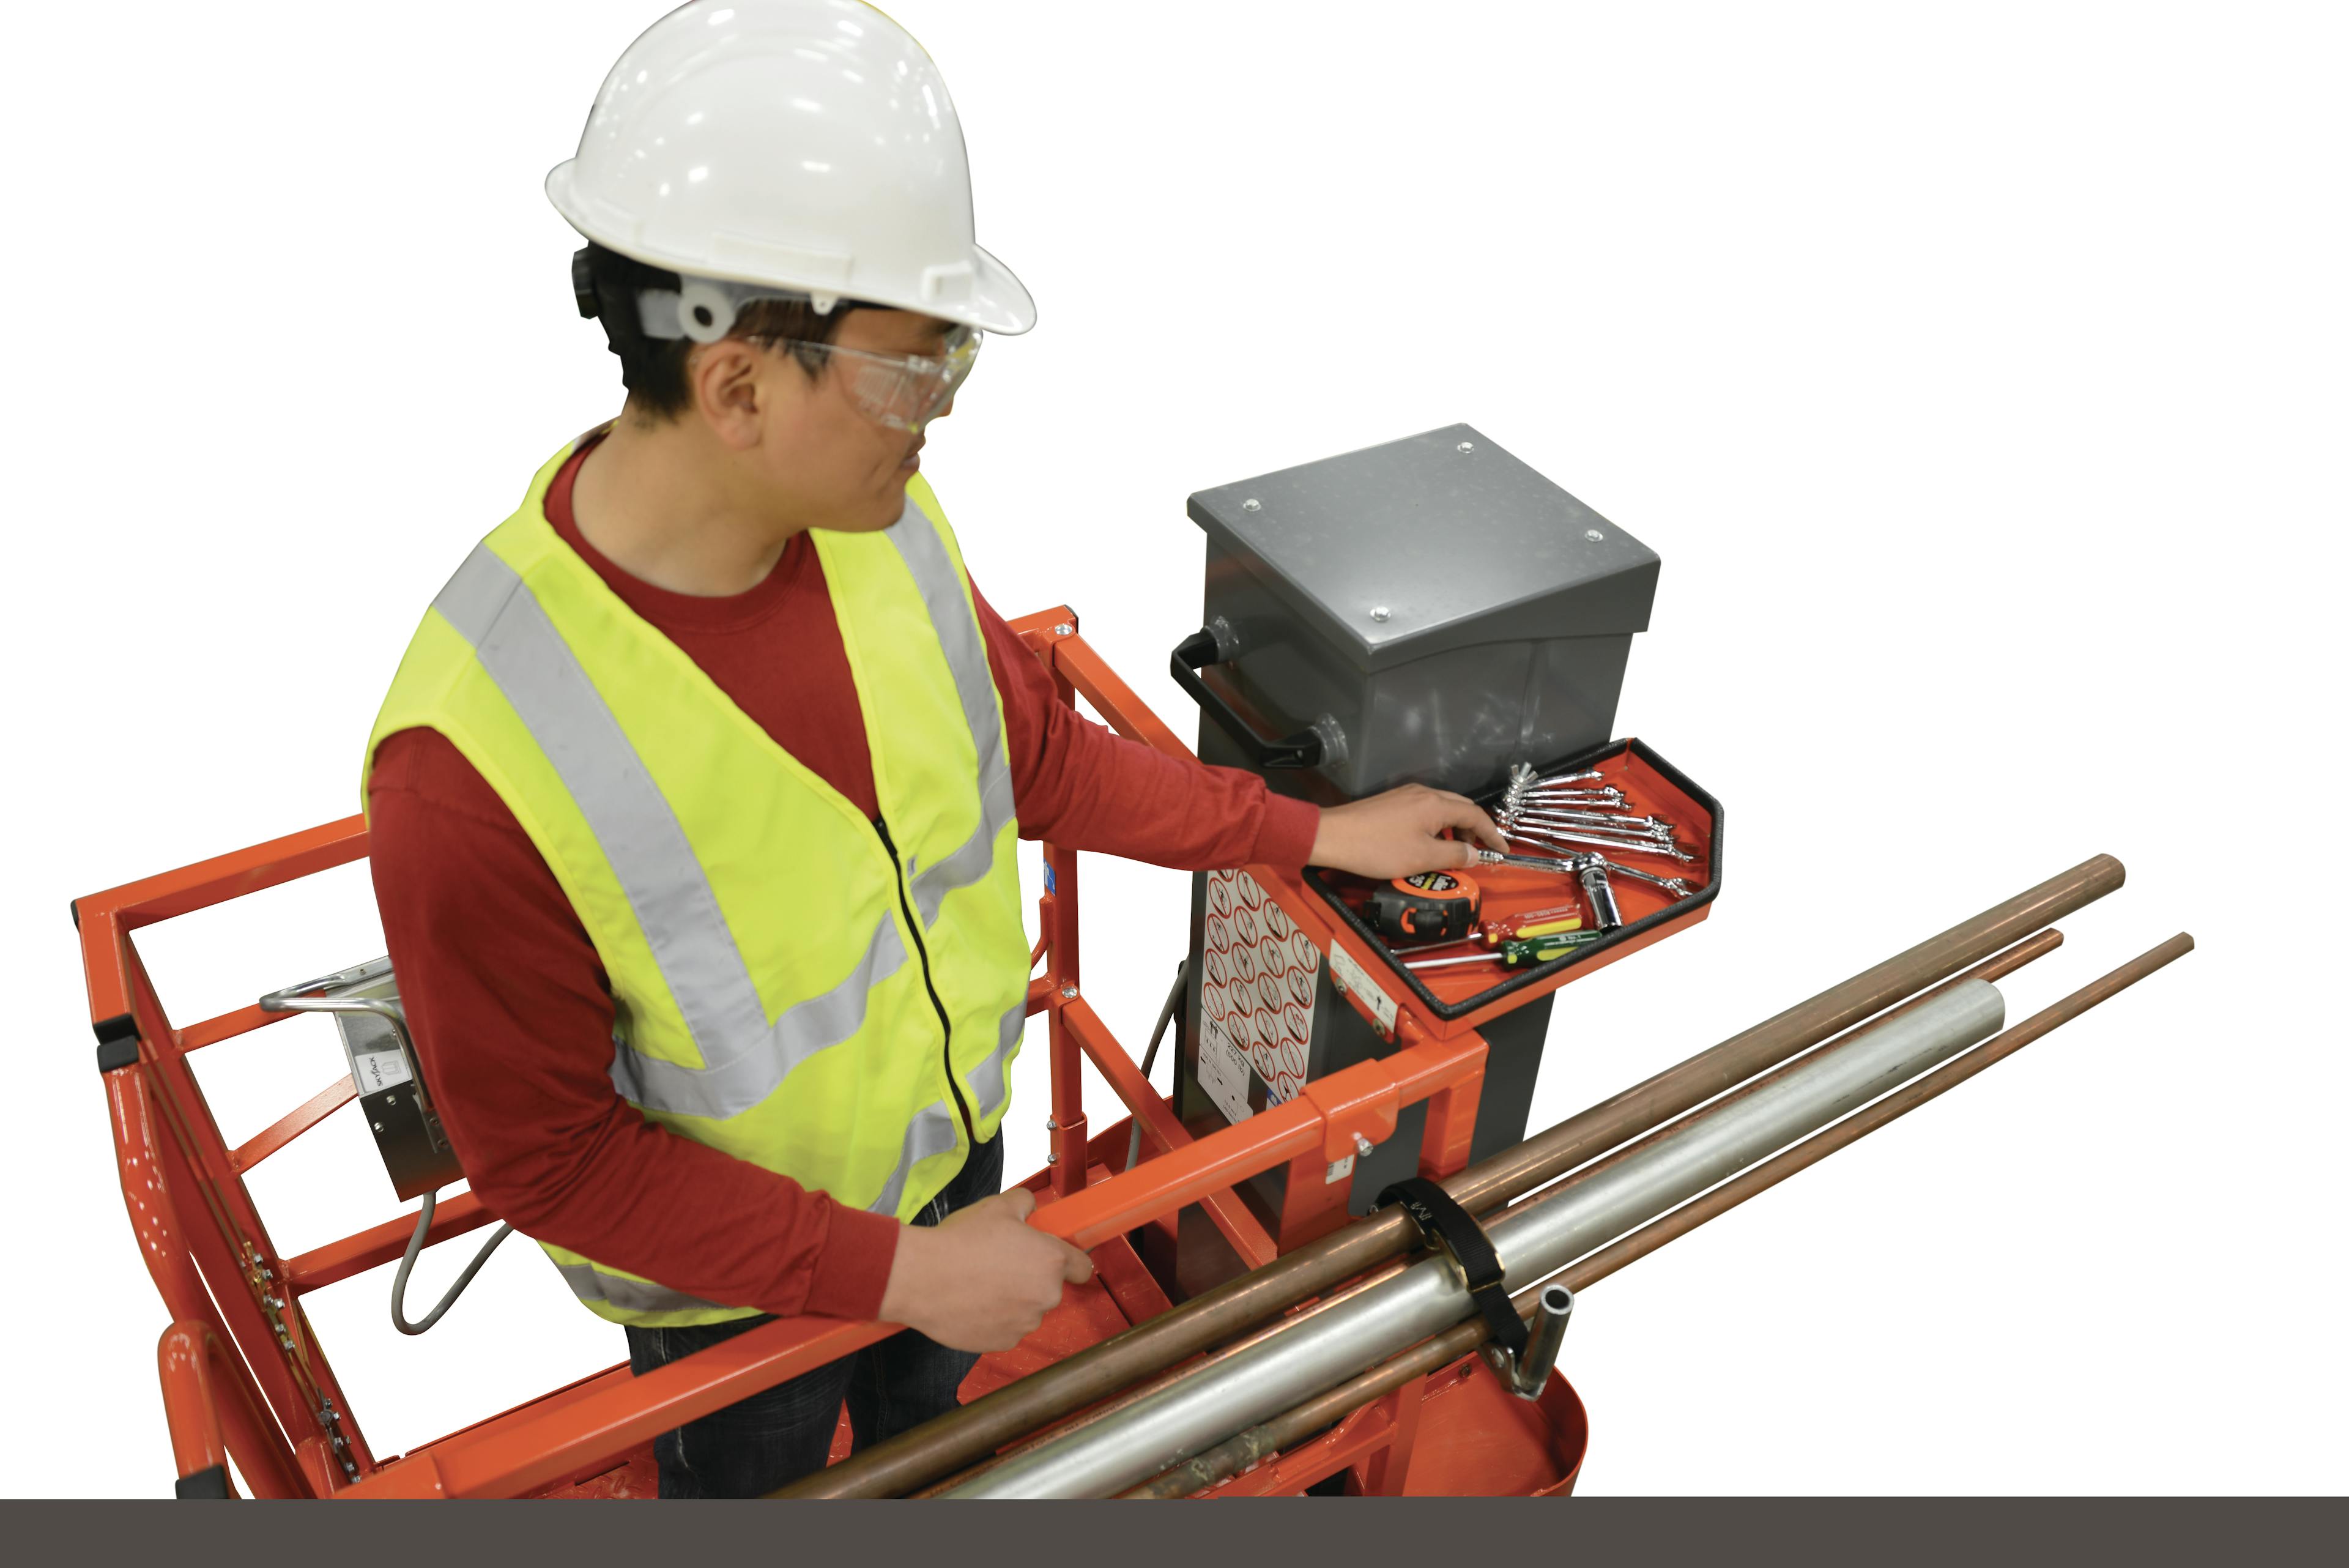 Skyjack Launches New Accessories for Aerial Lifts